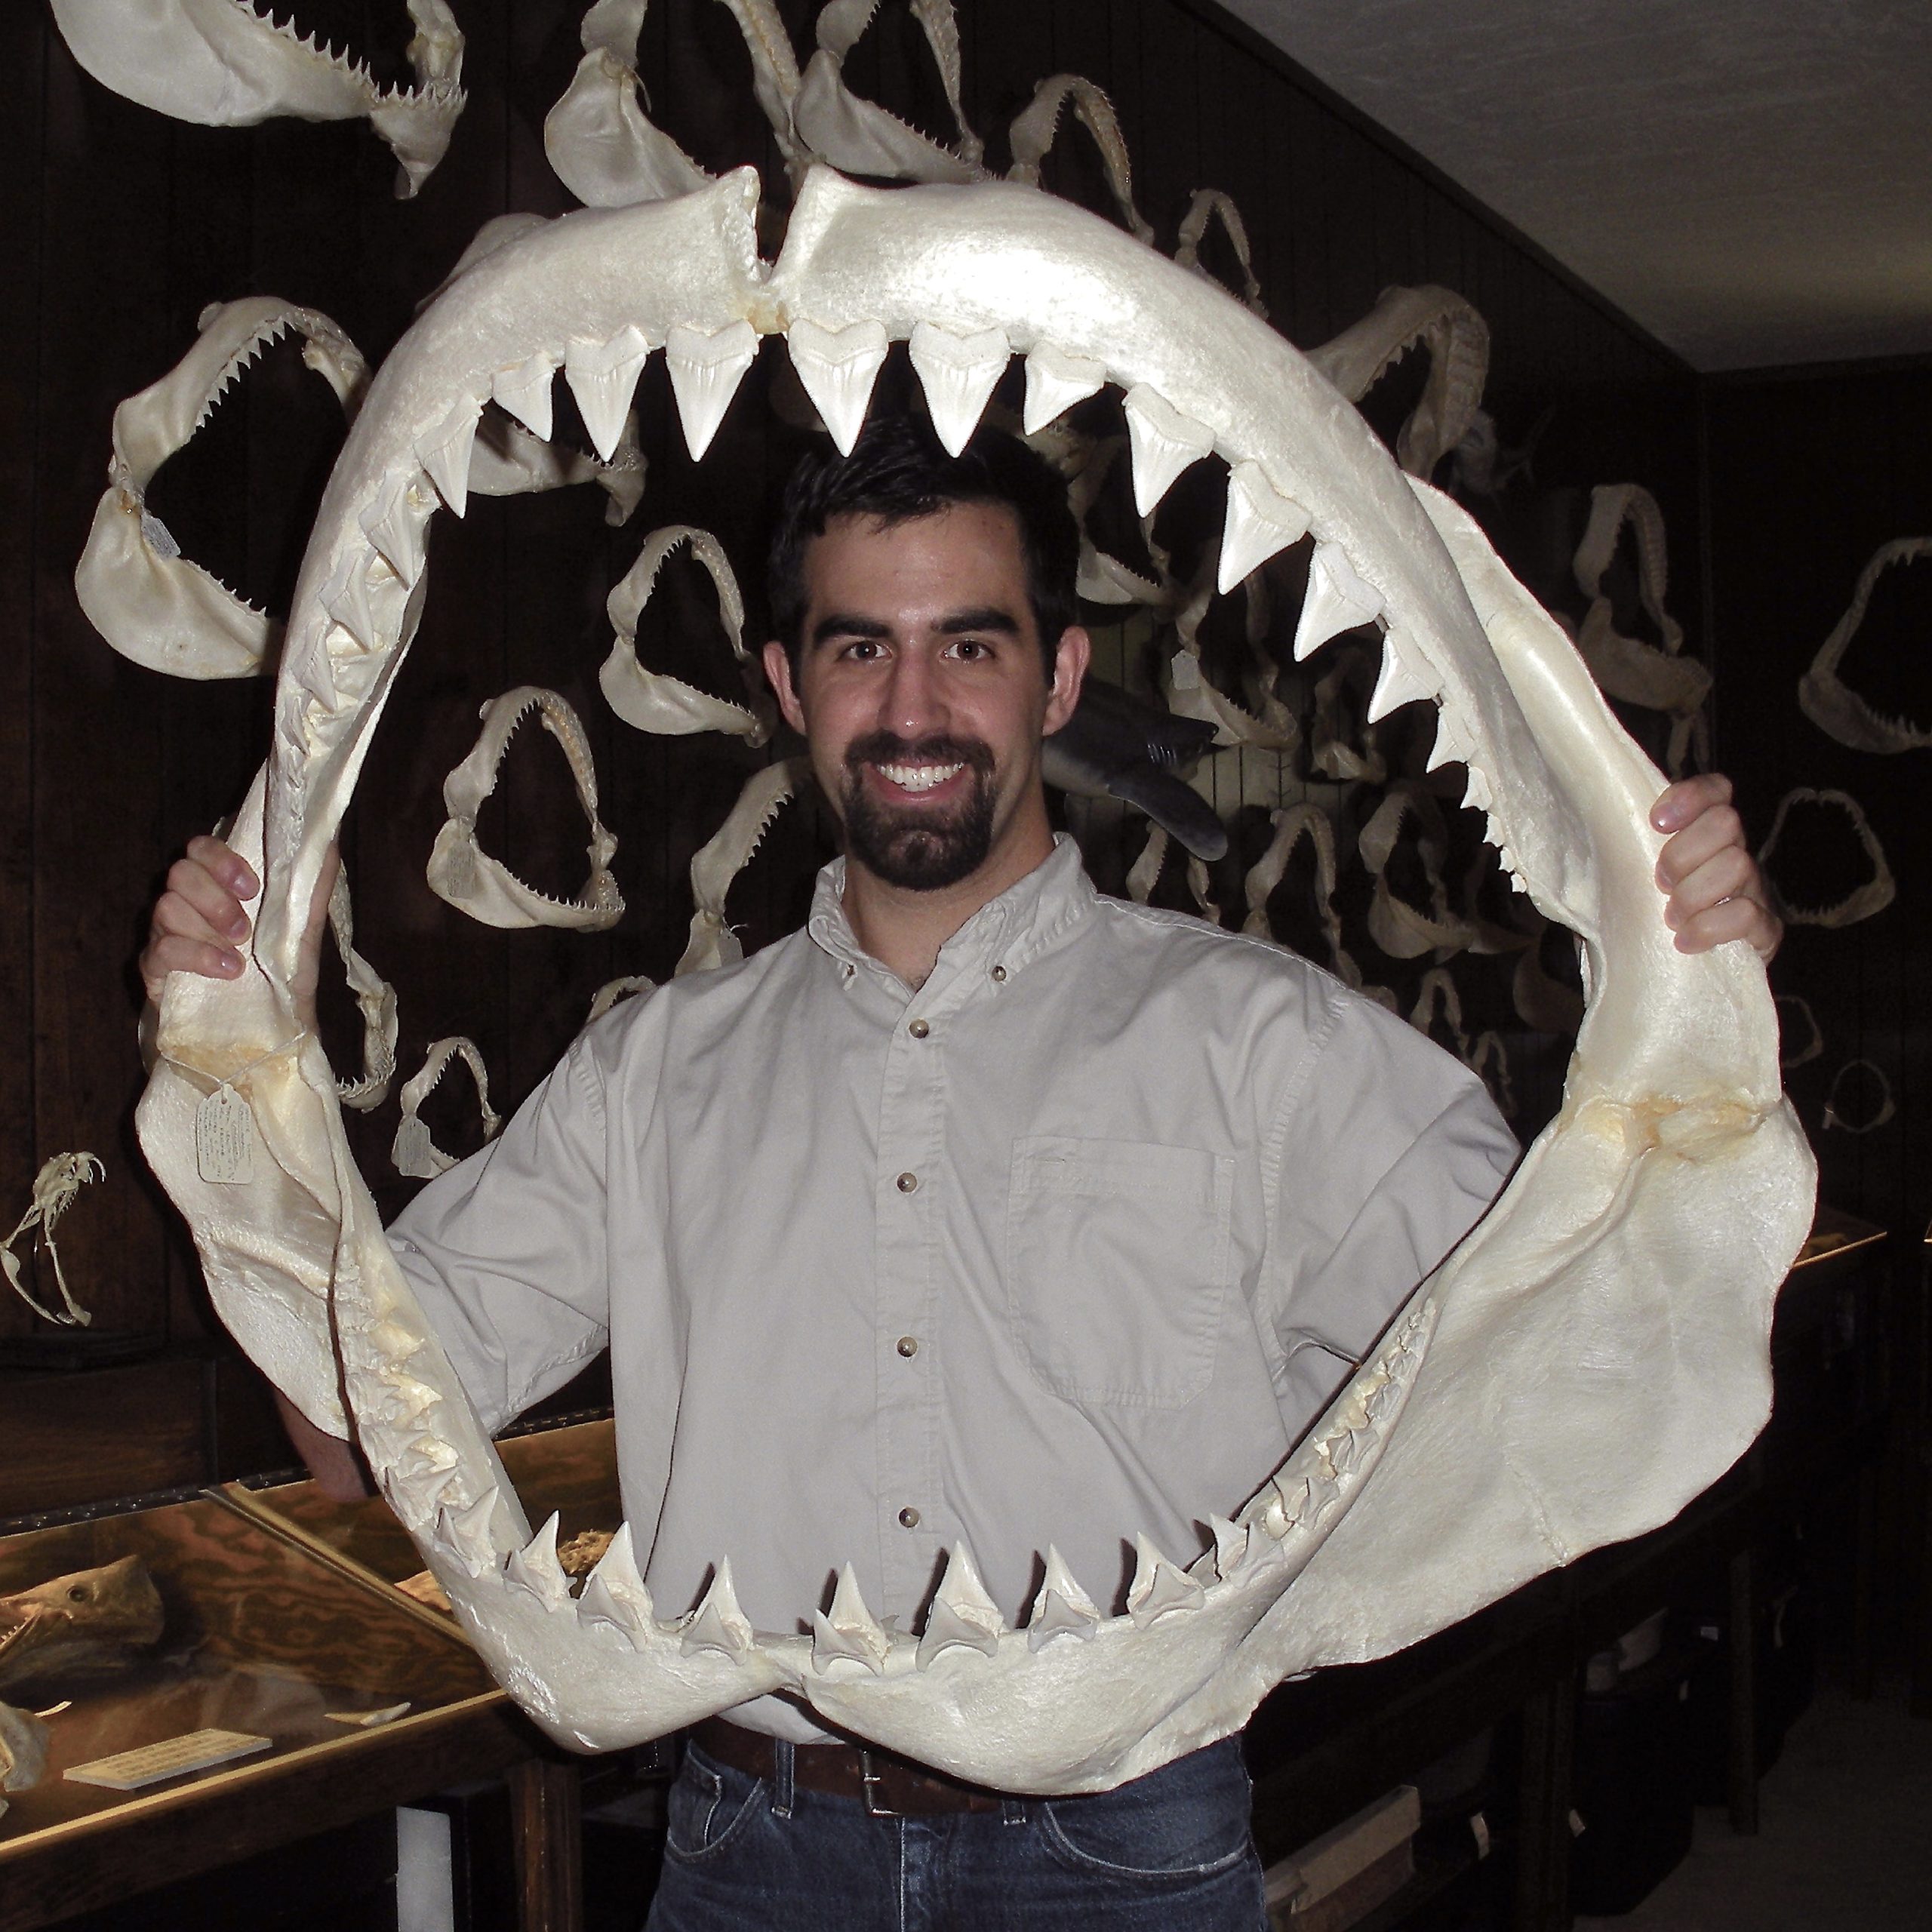 Here I am holding the jaws of a 19.5-foot white shark, Carcharodon carcharias, while visiting the collection of Dr. Gordon Hubbell.